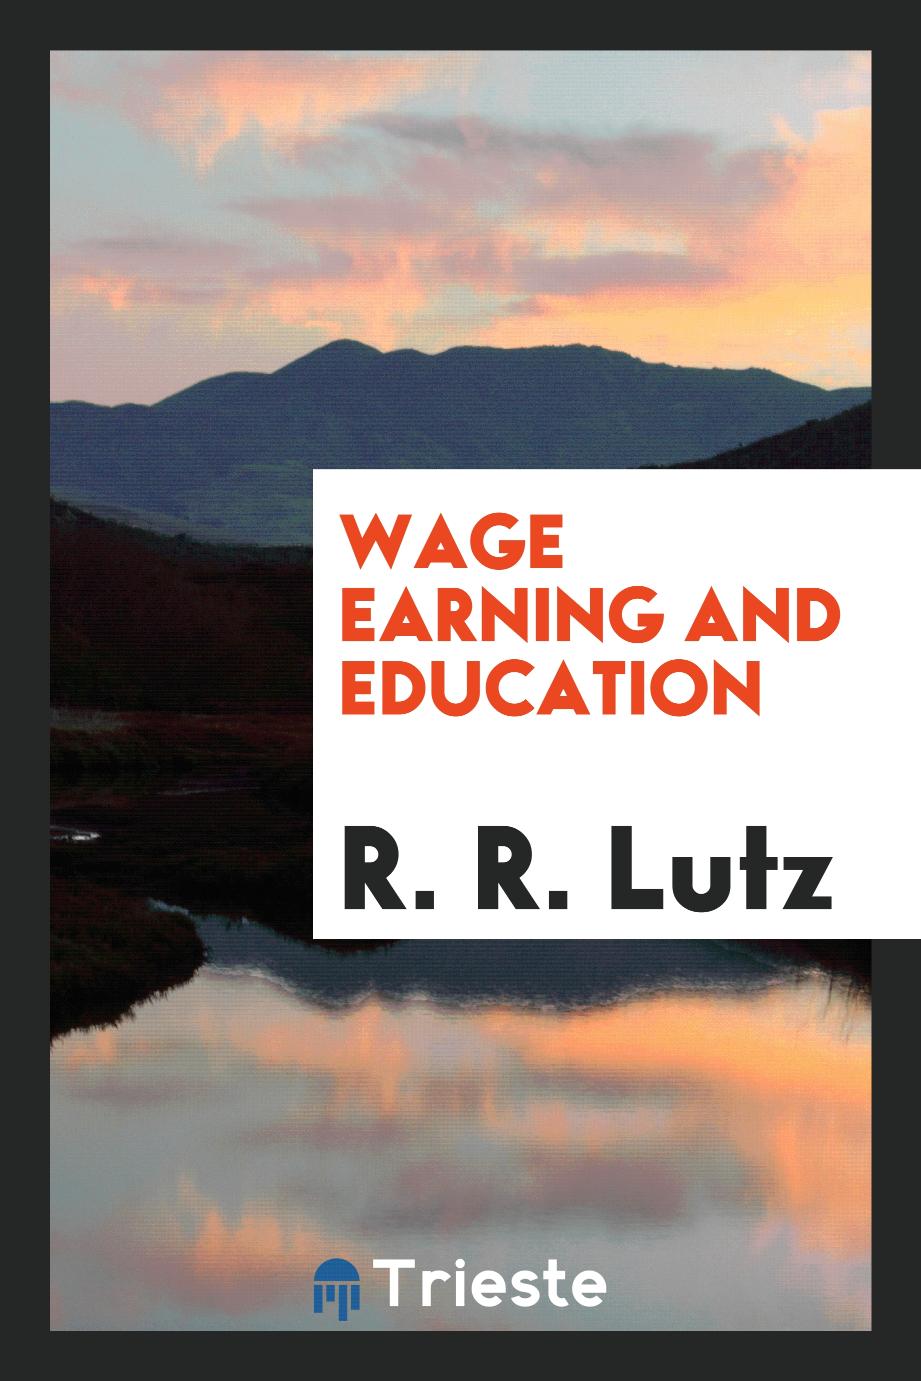 Wage earning and education